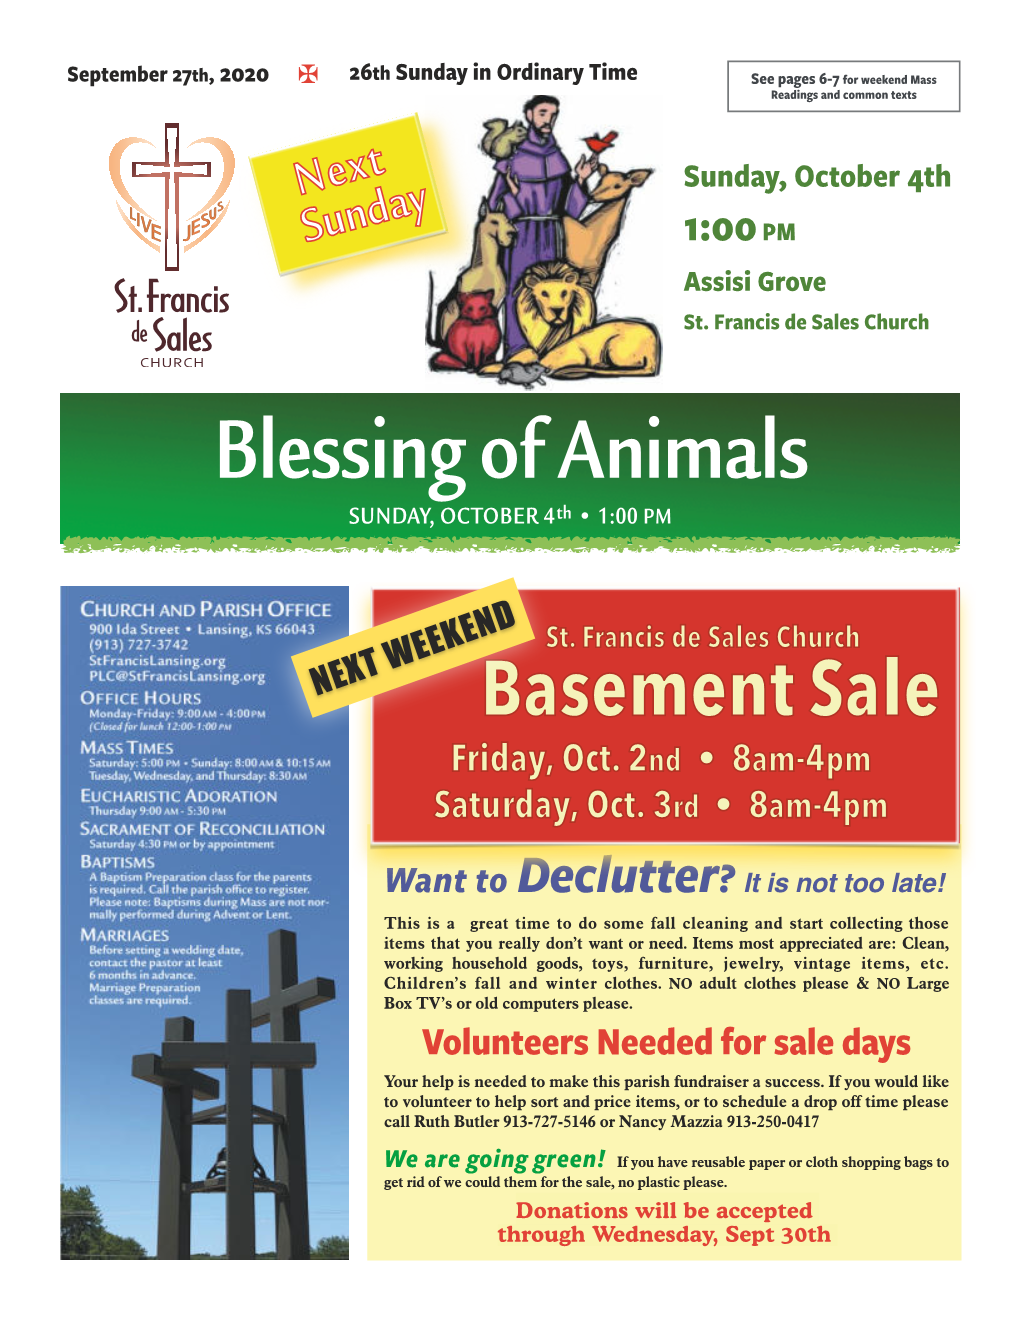 Blessing of Animals Th SUNDAY, OCTOBER 4 • 1:00 PM